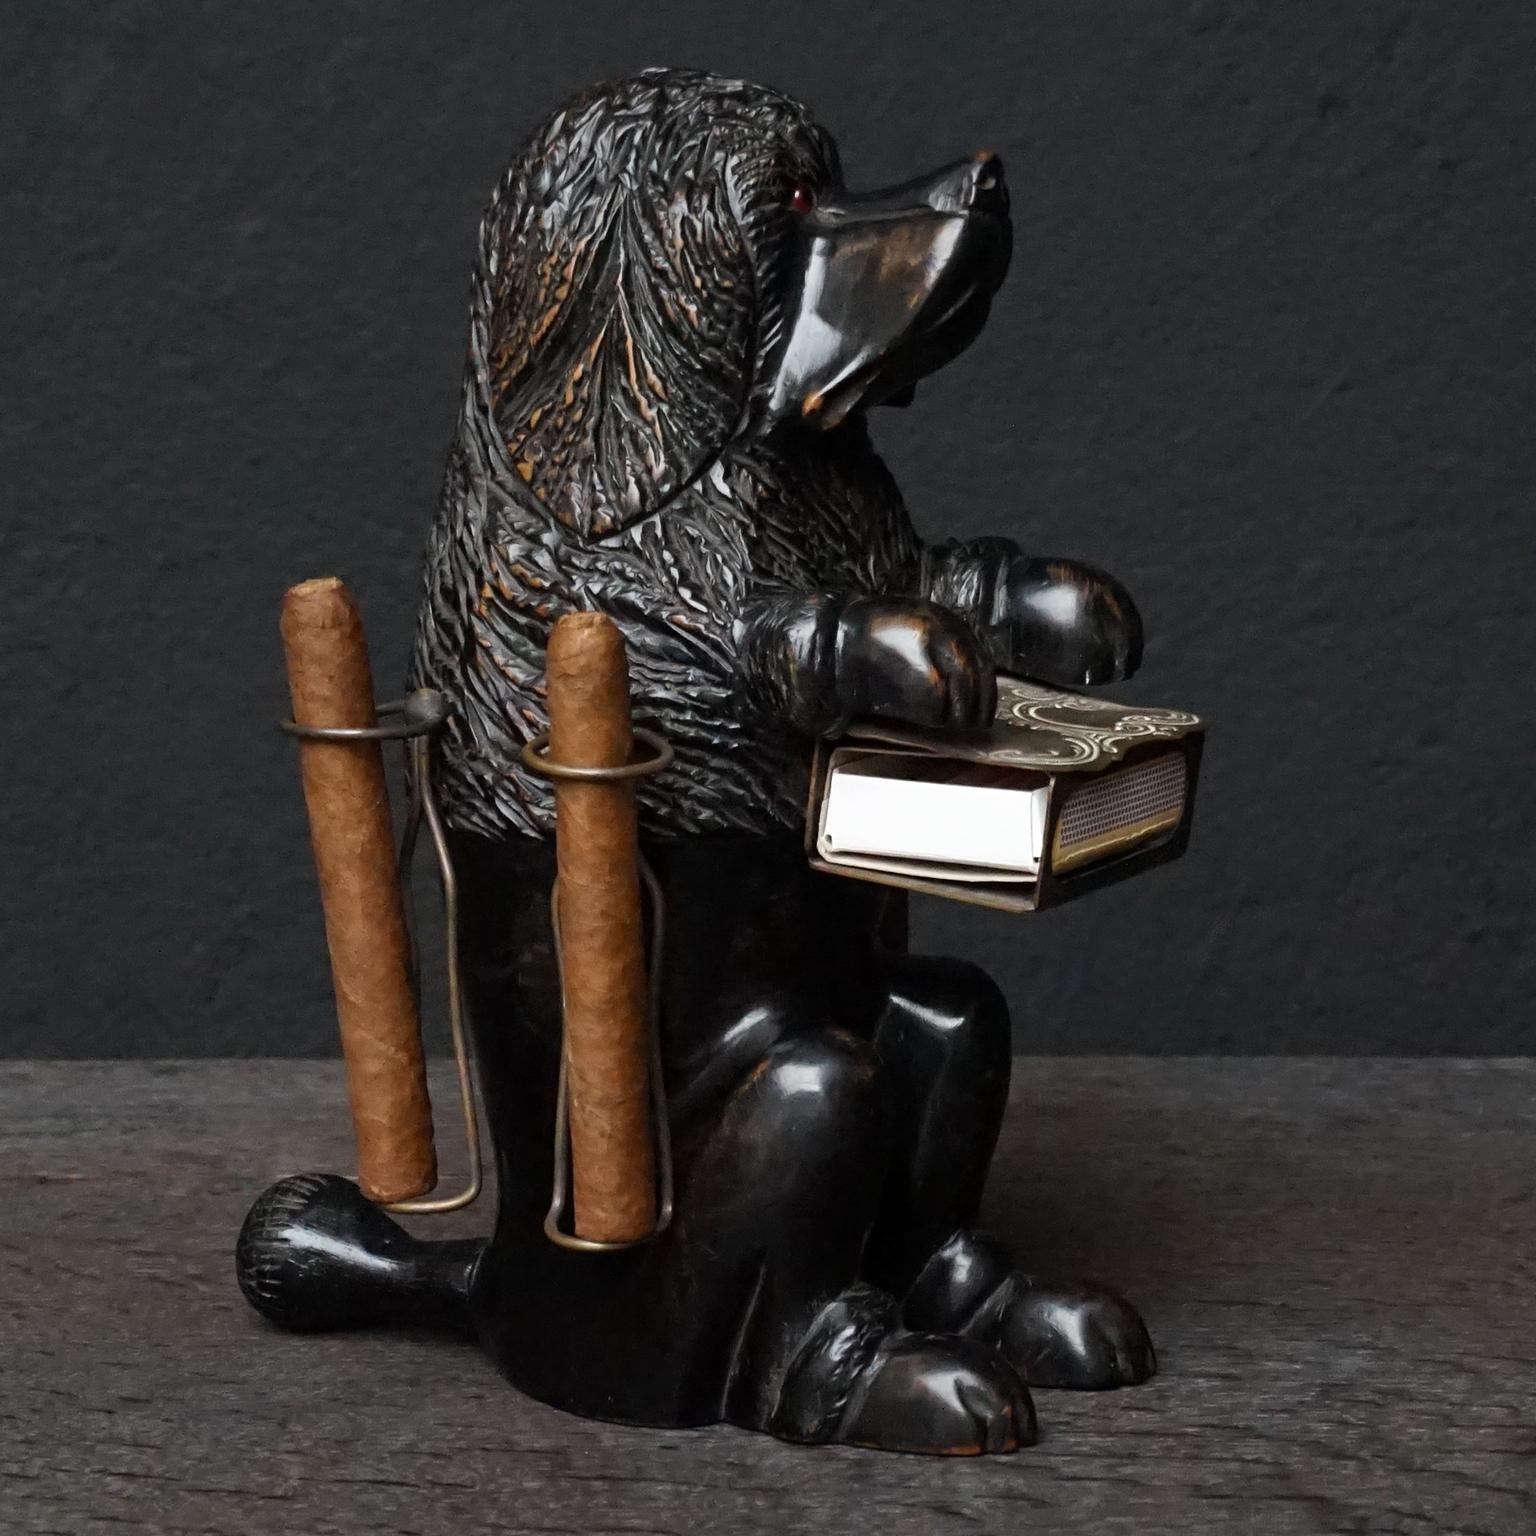 Swiss Brienz black forest hand carved linden wood begging poodle with brass matchbox holder and four brass cigar holders.

Black Forest wood carved art originates from a small mountain town Brienz, Switzerland. 
In the 19th century travelling became